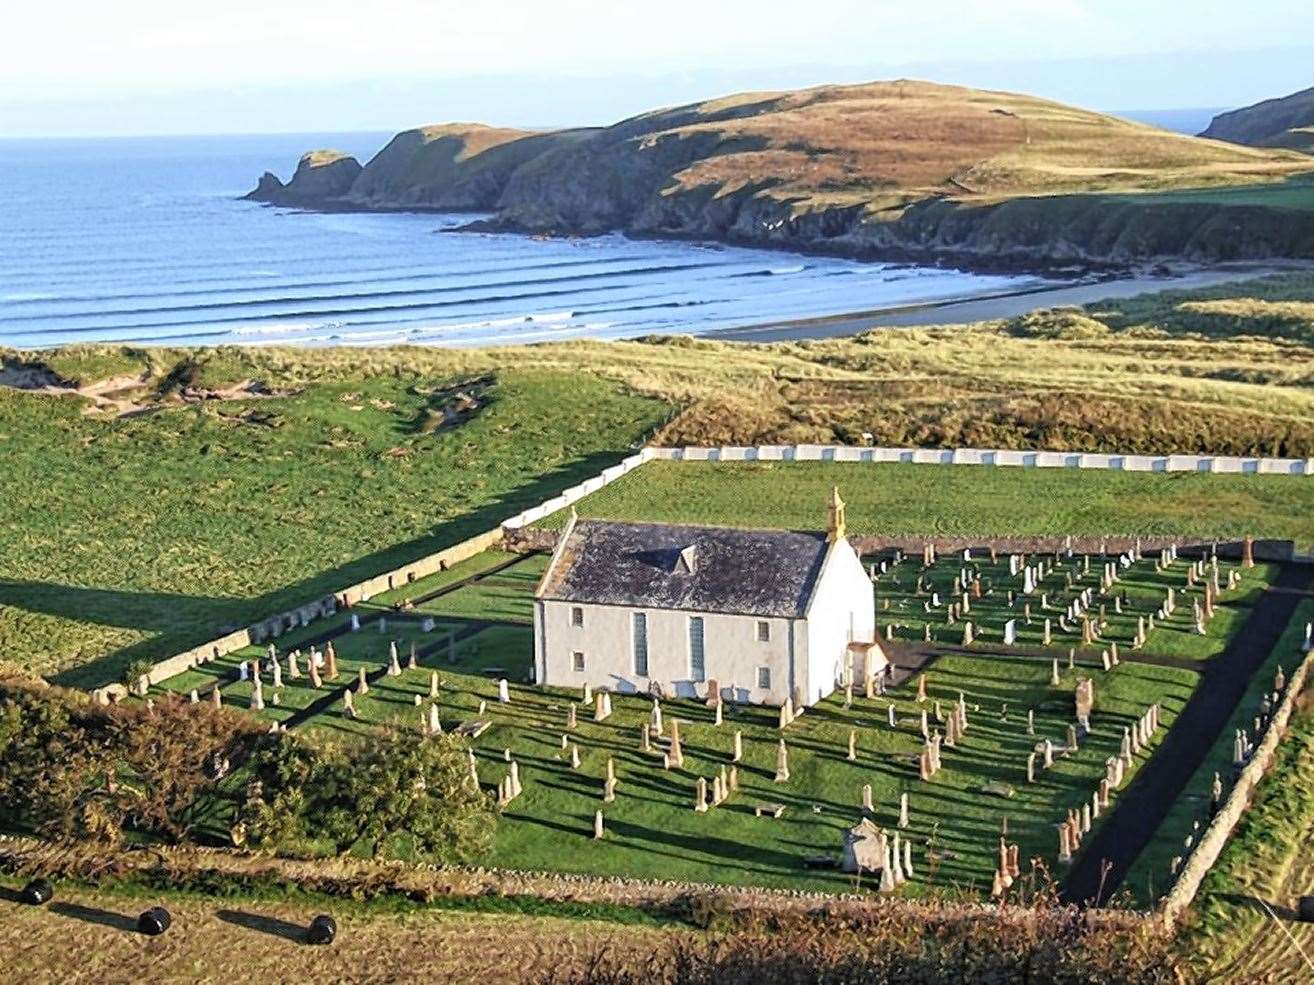 The museum, a showcase for the culture and heritage of the north Highlands, is housed in the former parish church of St Columba.